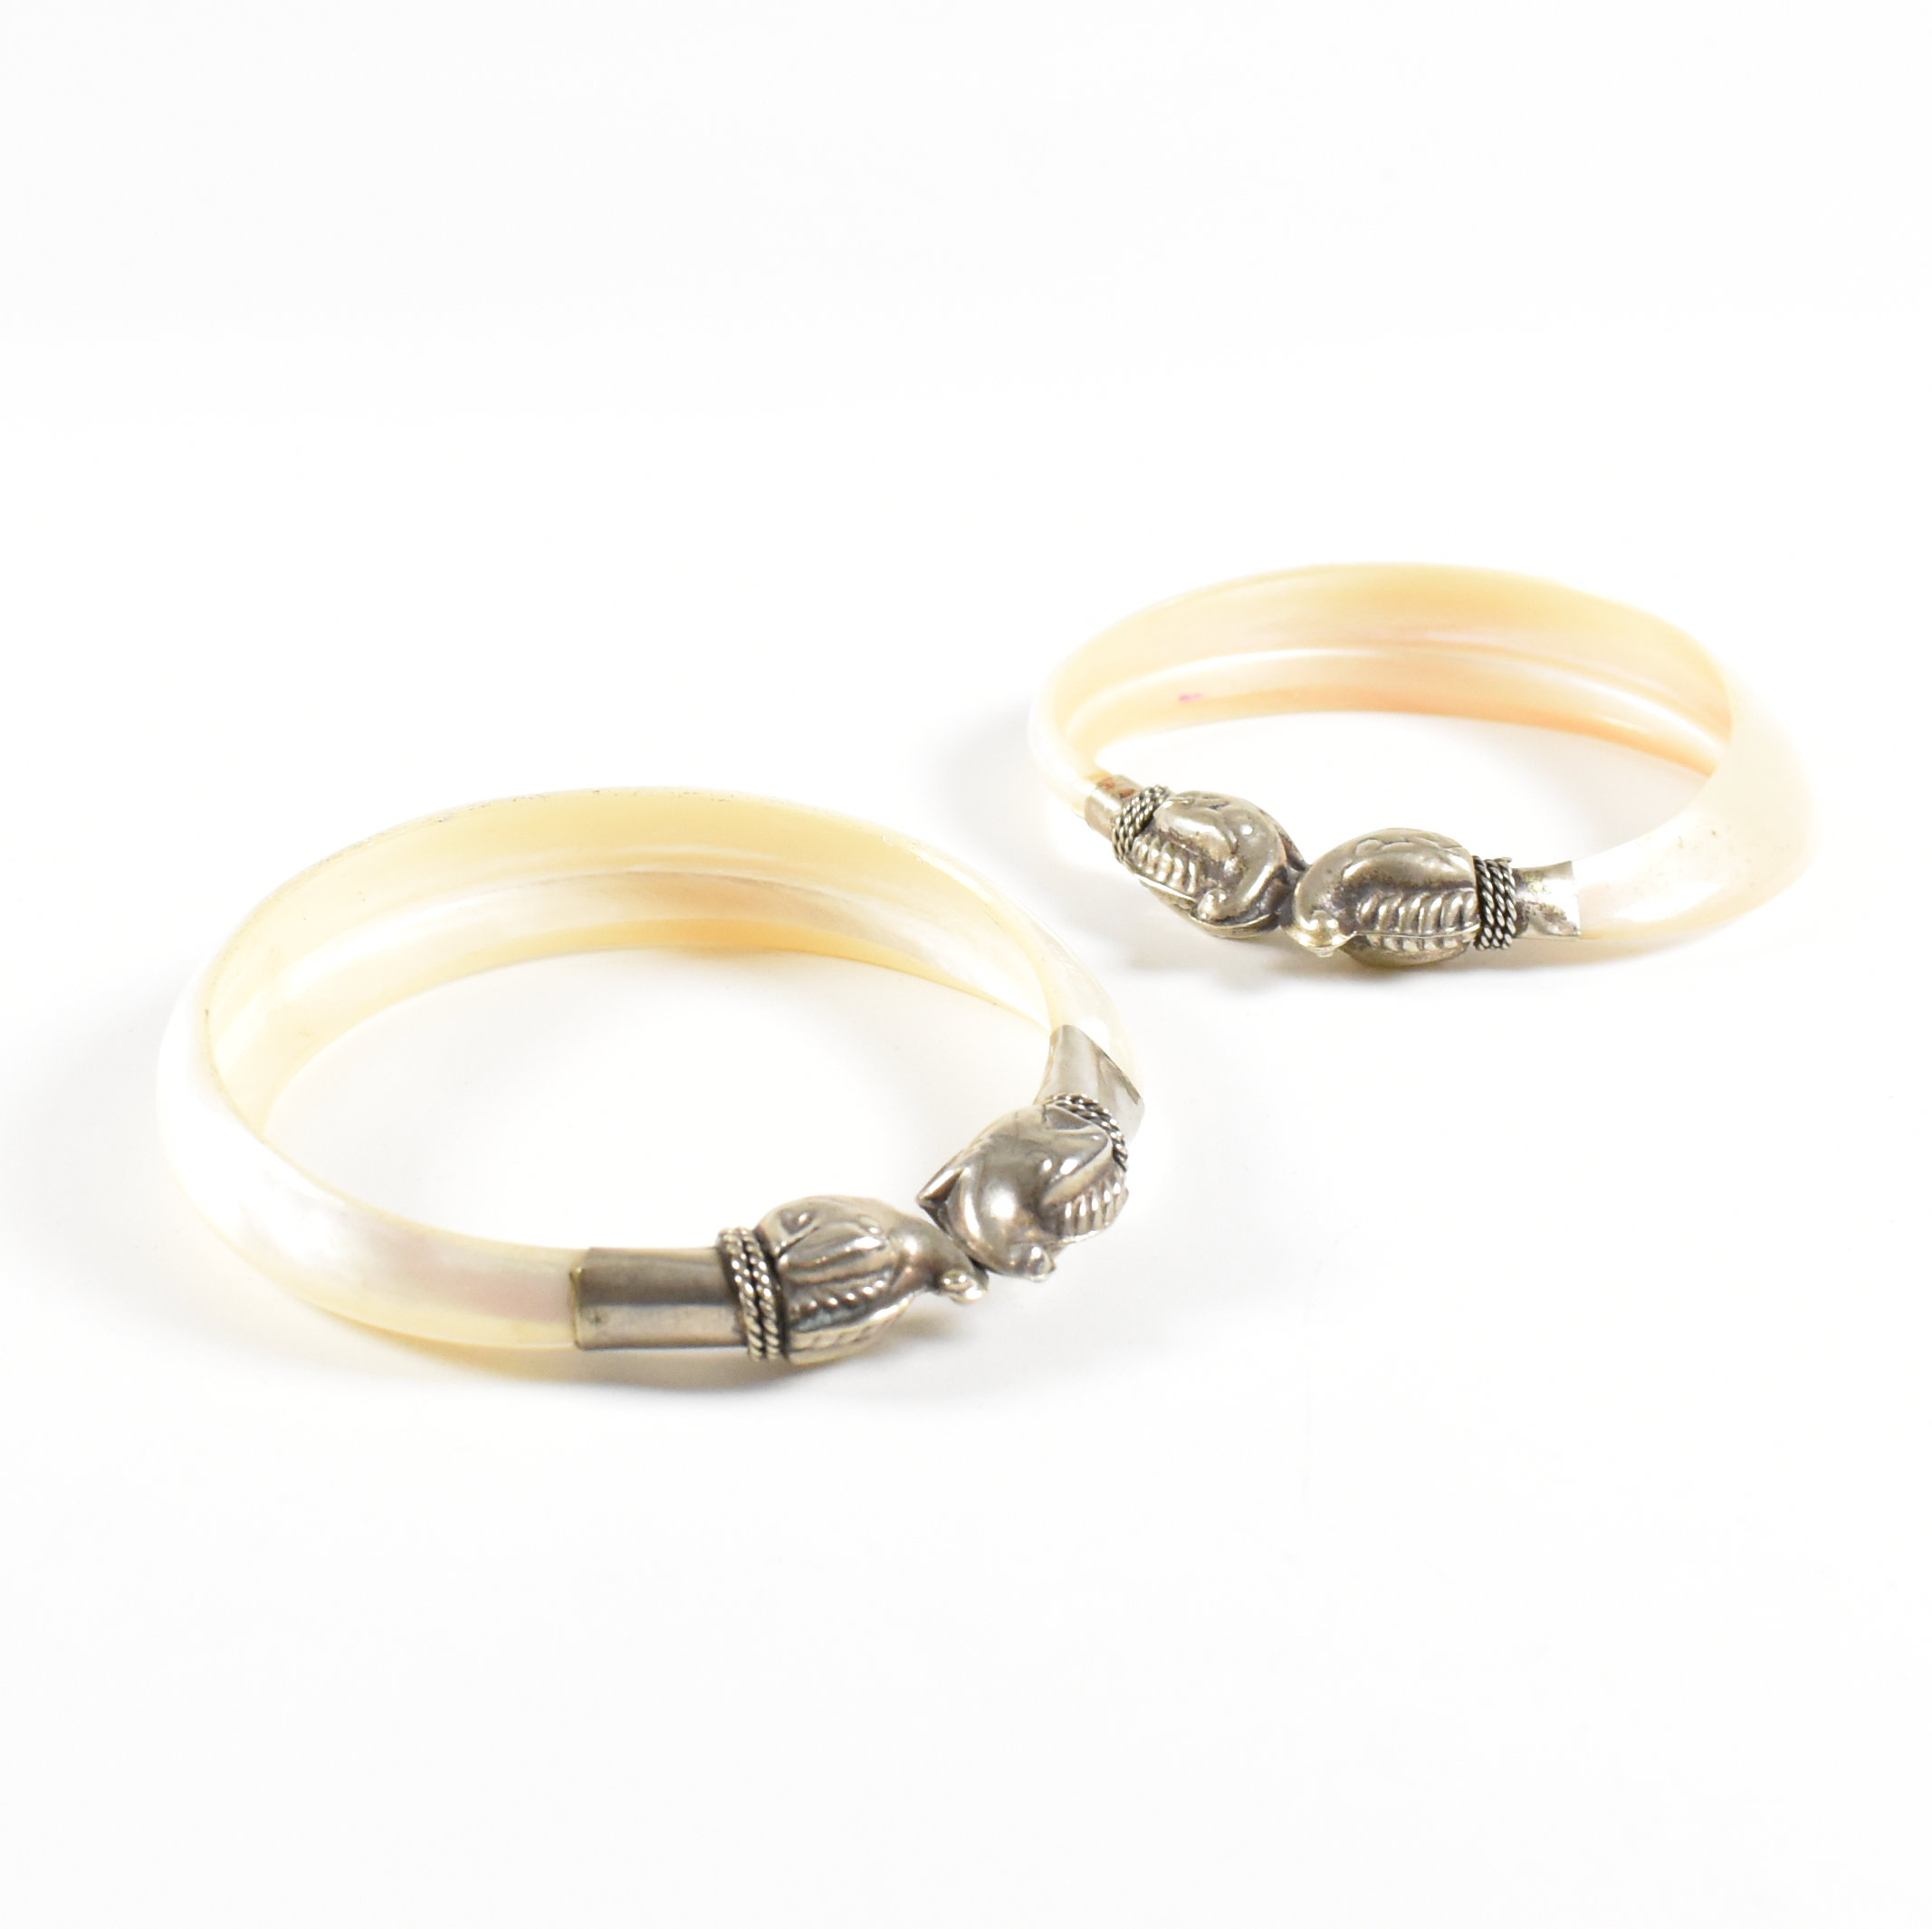 PAIR OF MOTHER OF PEARL BANGLES - Image 5 of 9